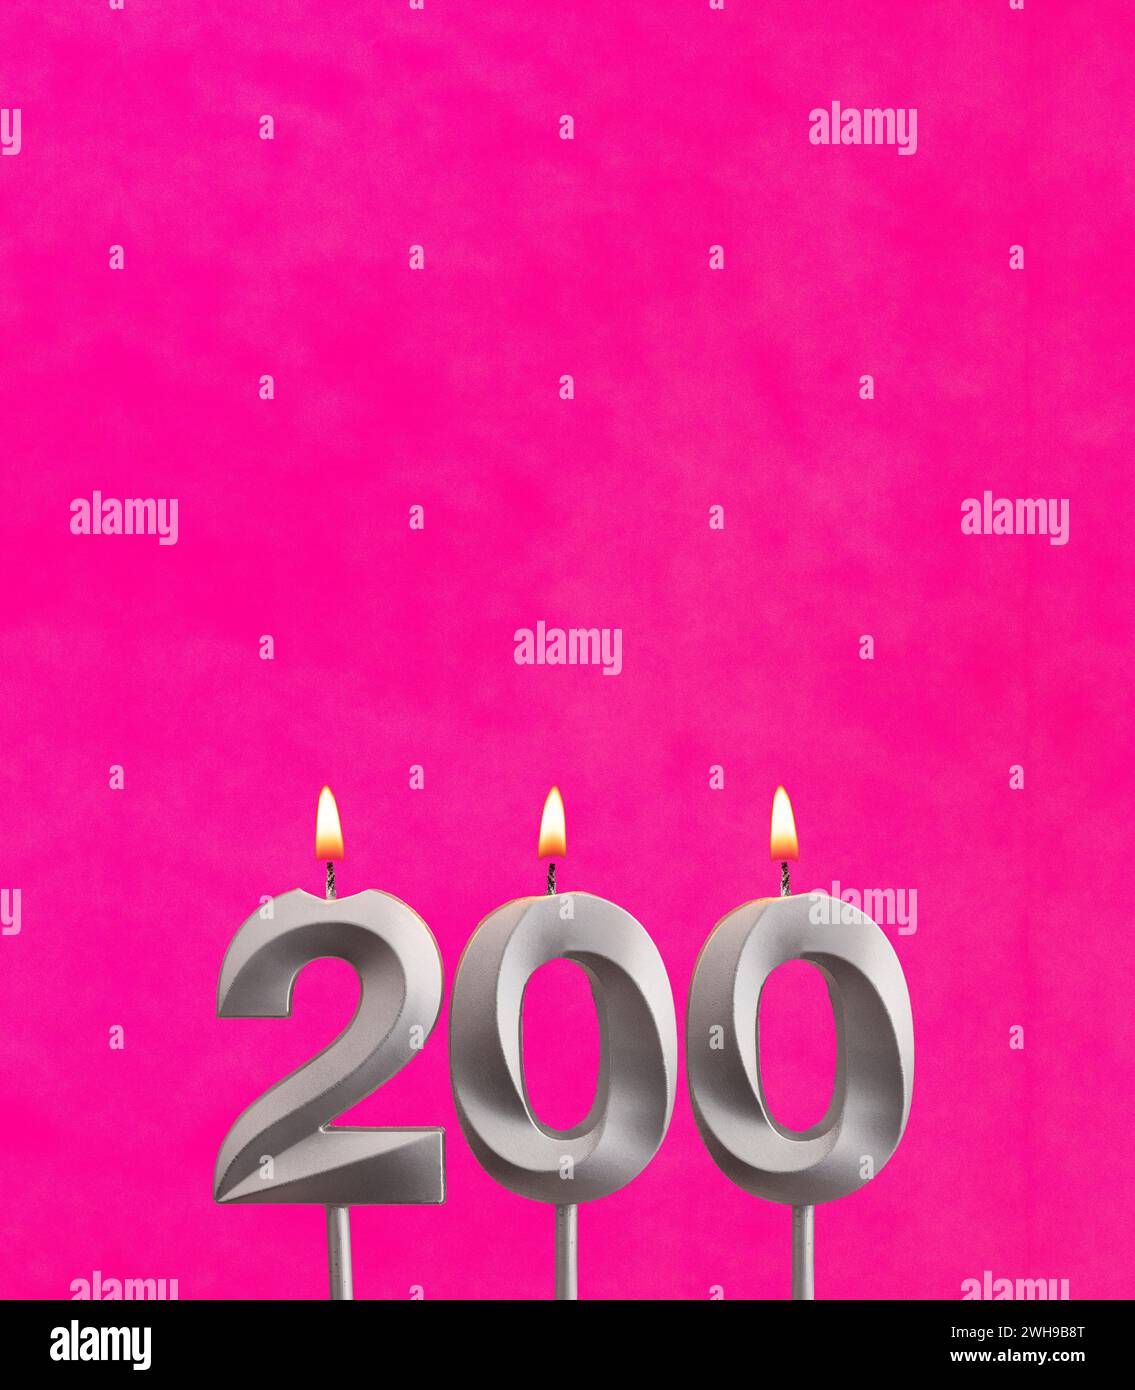 Number of followers or likes - Candle number 200 Stock Photo